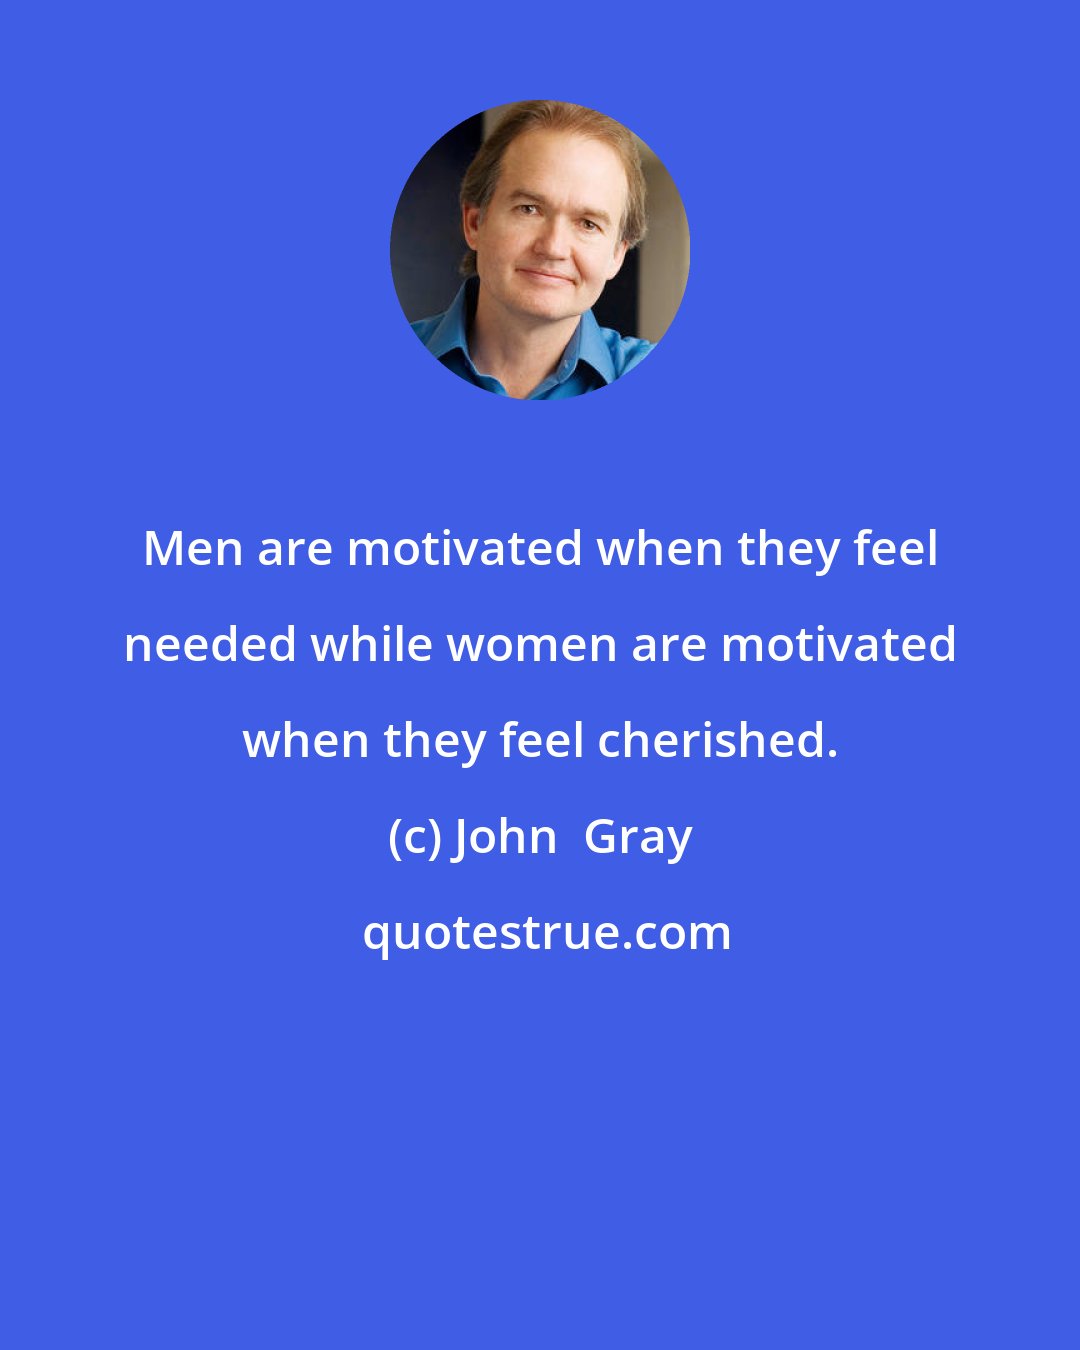 John  Gray: Men are motivated when they feel needed while women are motivated when they feel cherished.